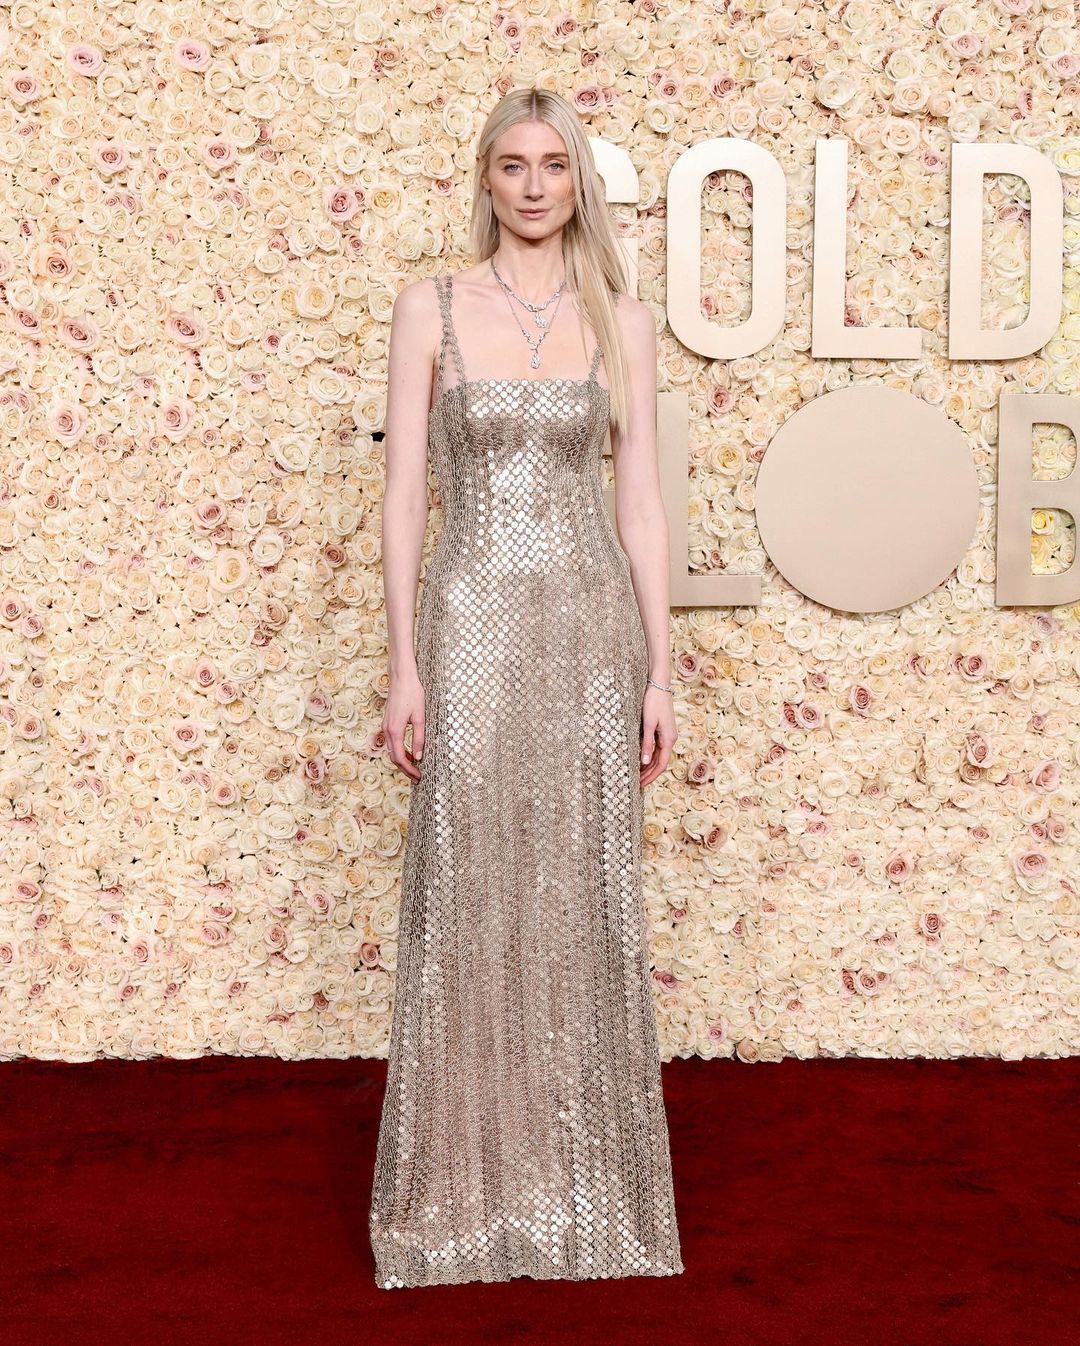 Elizabeth Debicki wearing a couture gown with silver disks and jewelry from Dior